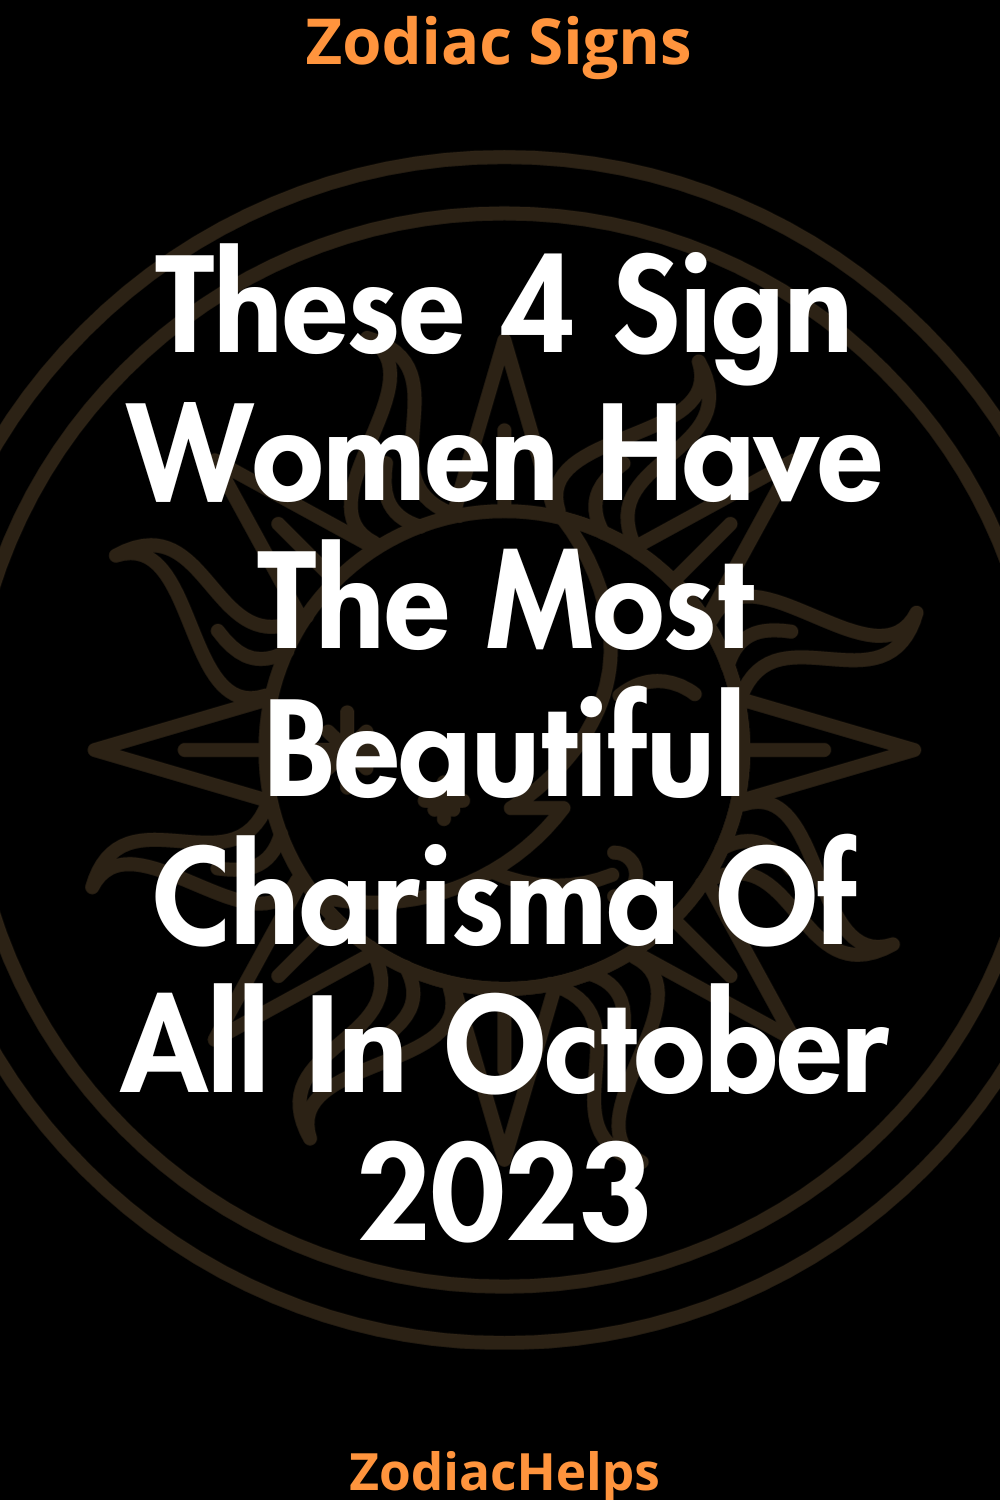 These 4 Sign Women Have The Most Beautiful Charisma Of All In October 2023